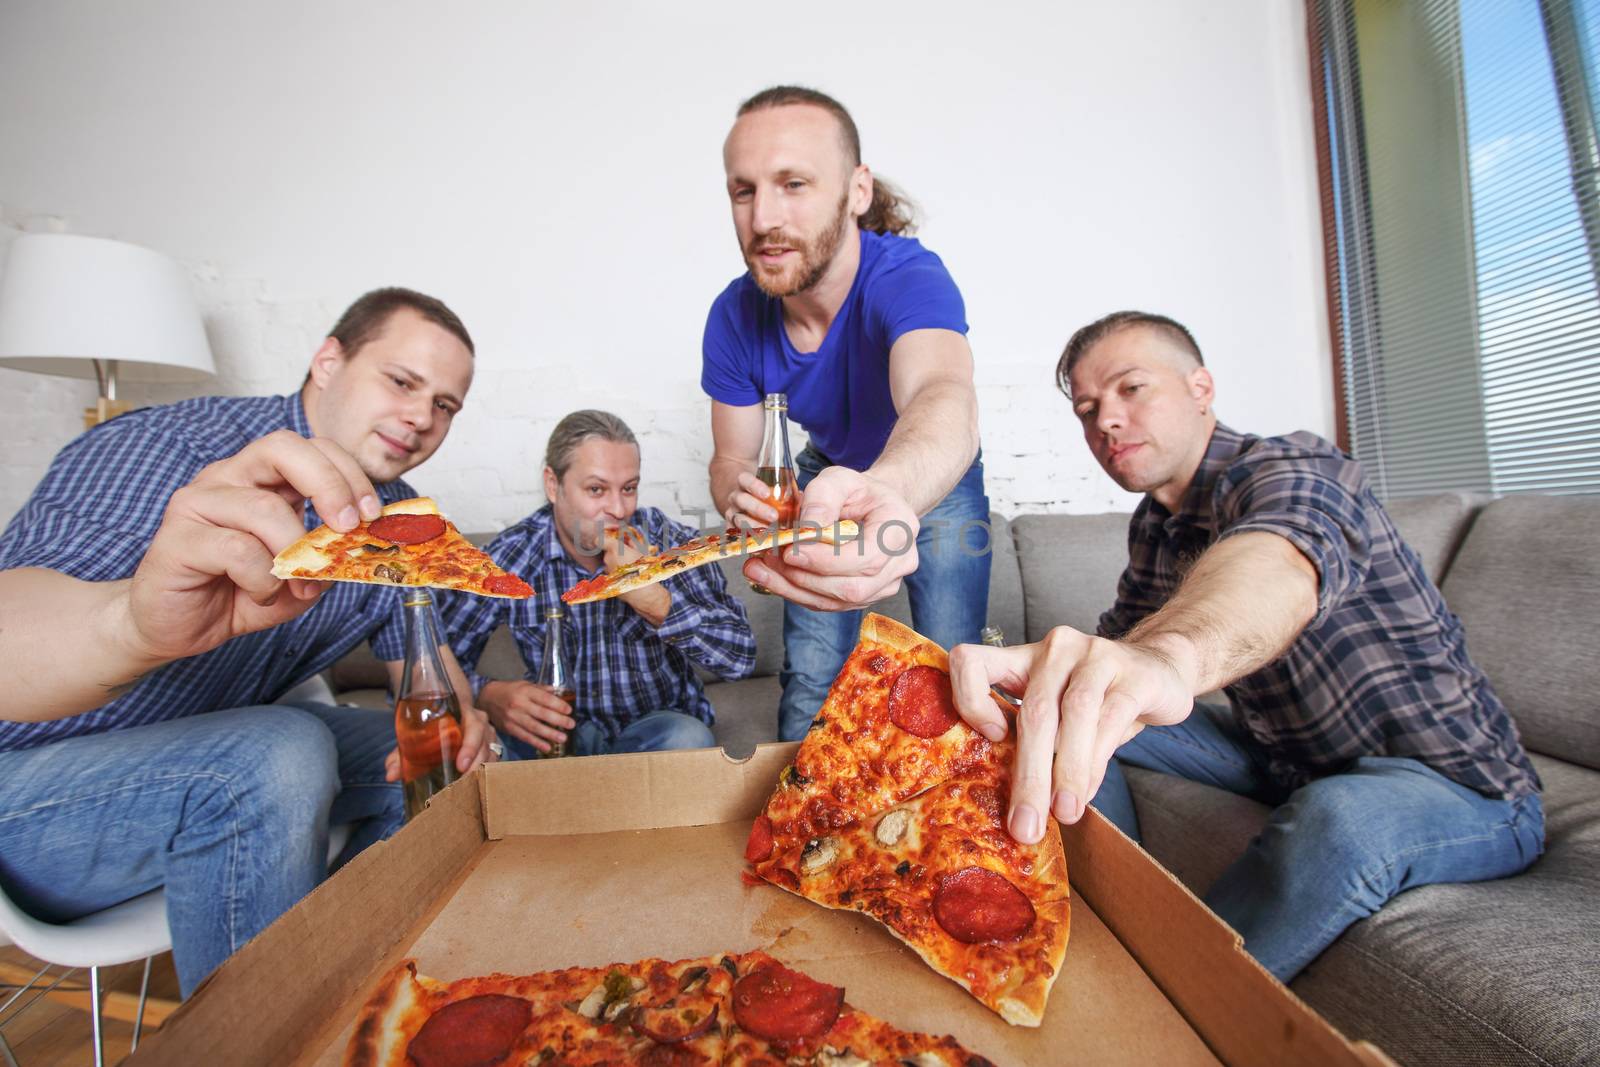 Male friends sitting at home on couch, taking pizza, drinking beer